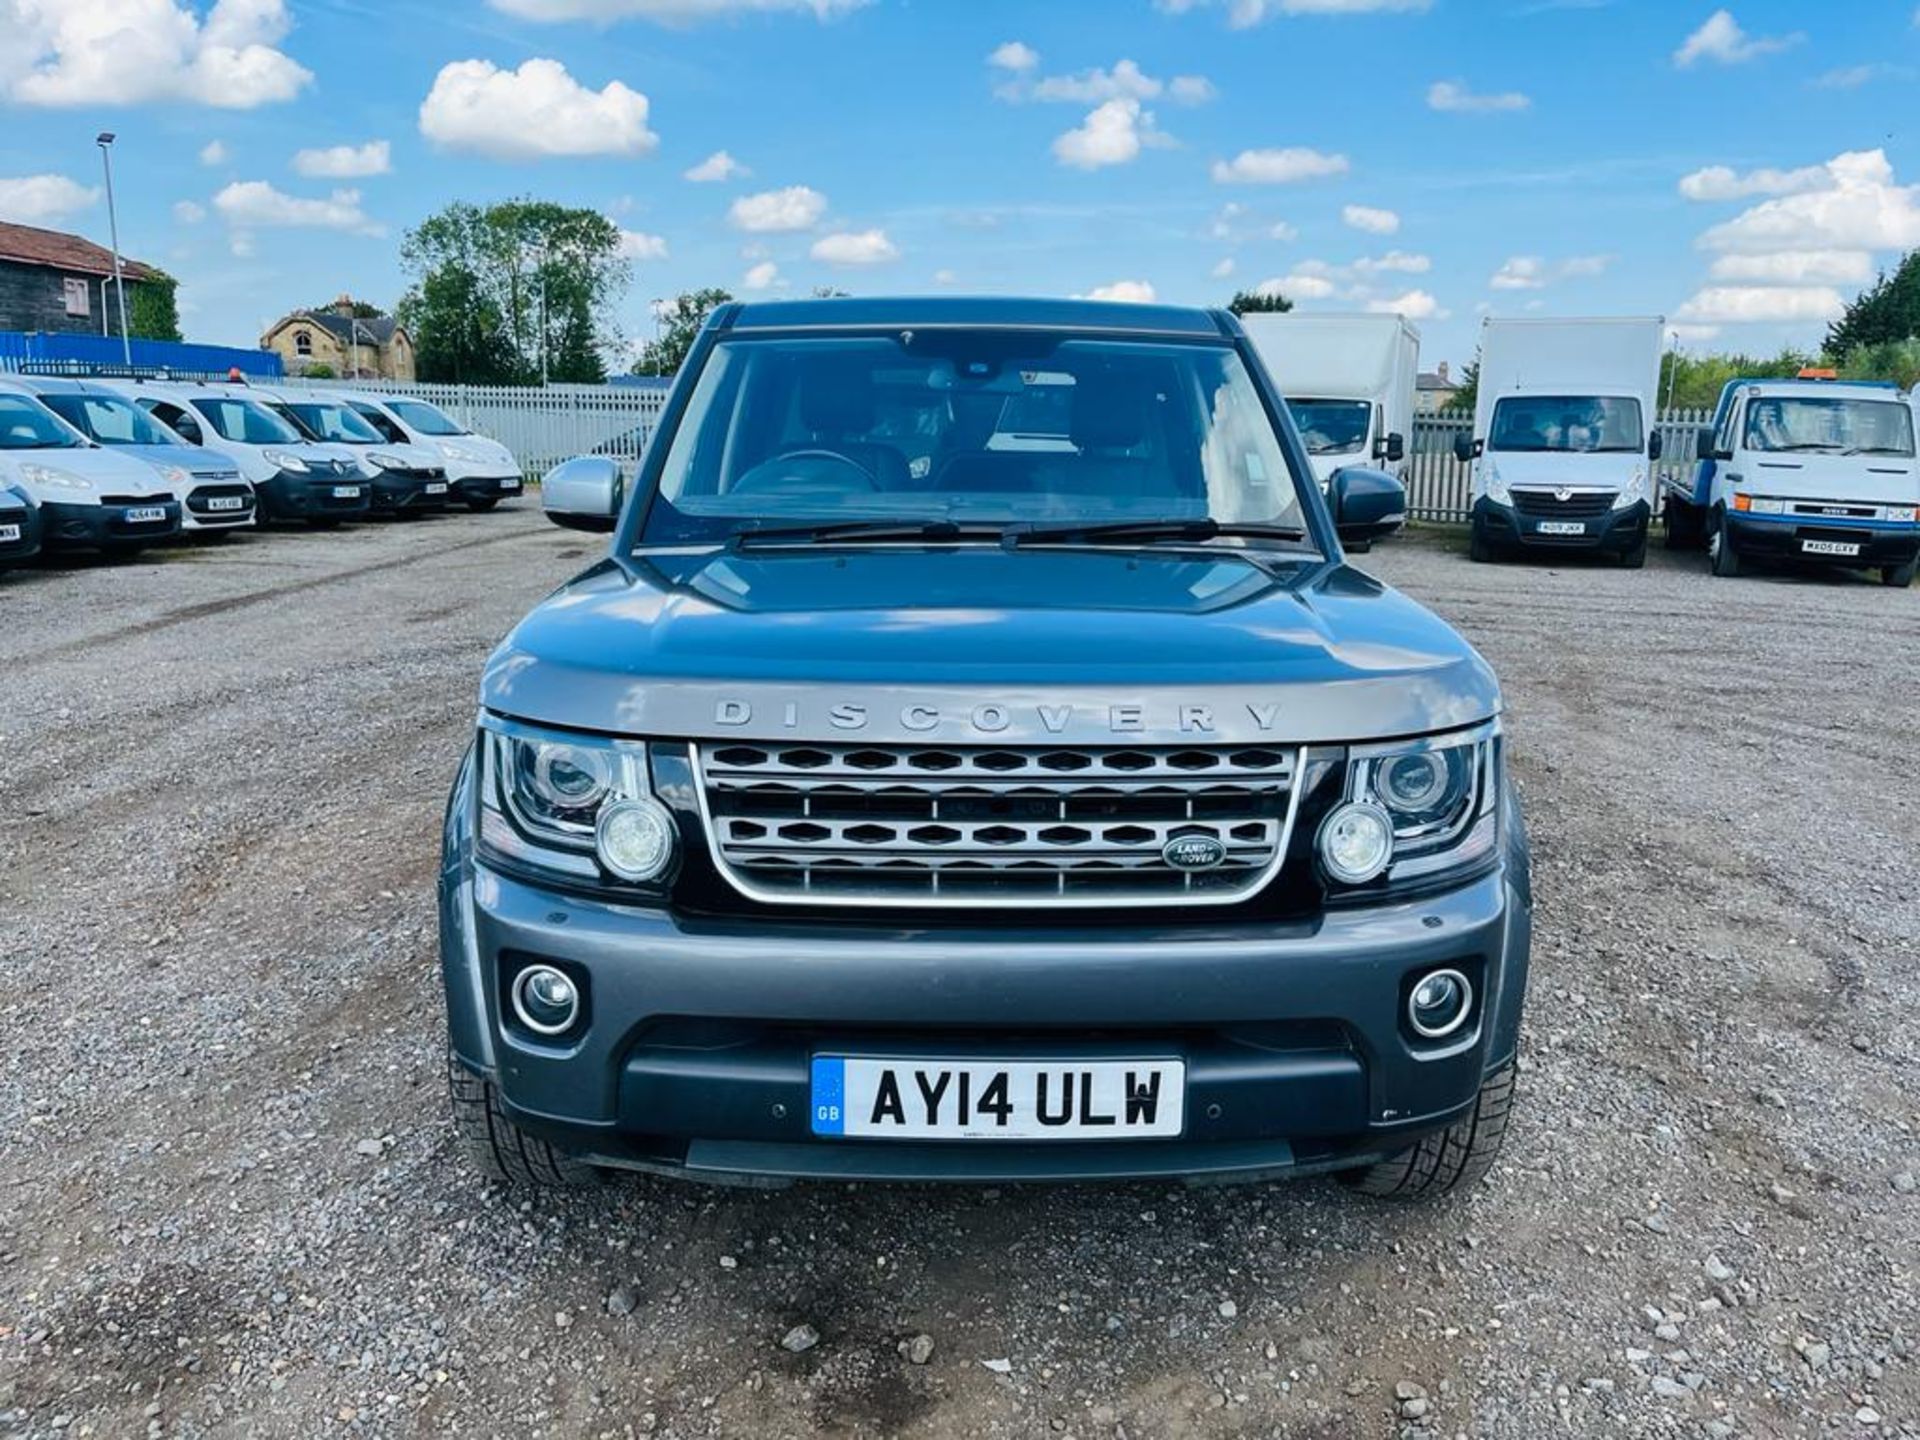 Land Rover Discovery 4 3.0 SDV6 XS CommandShift 2014 '14 Reg' Sat Nav - A/C - 4WD - Image 2 of 26